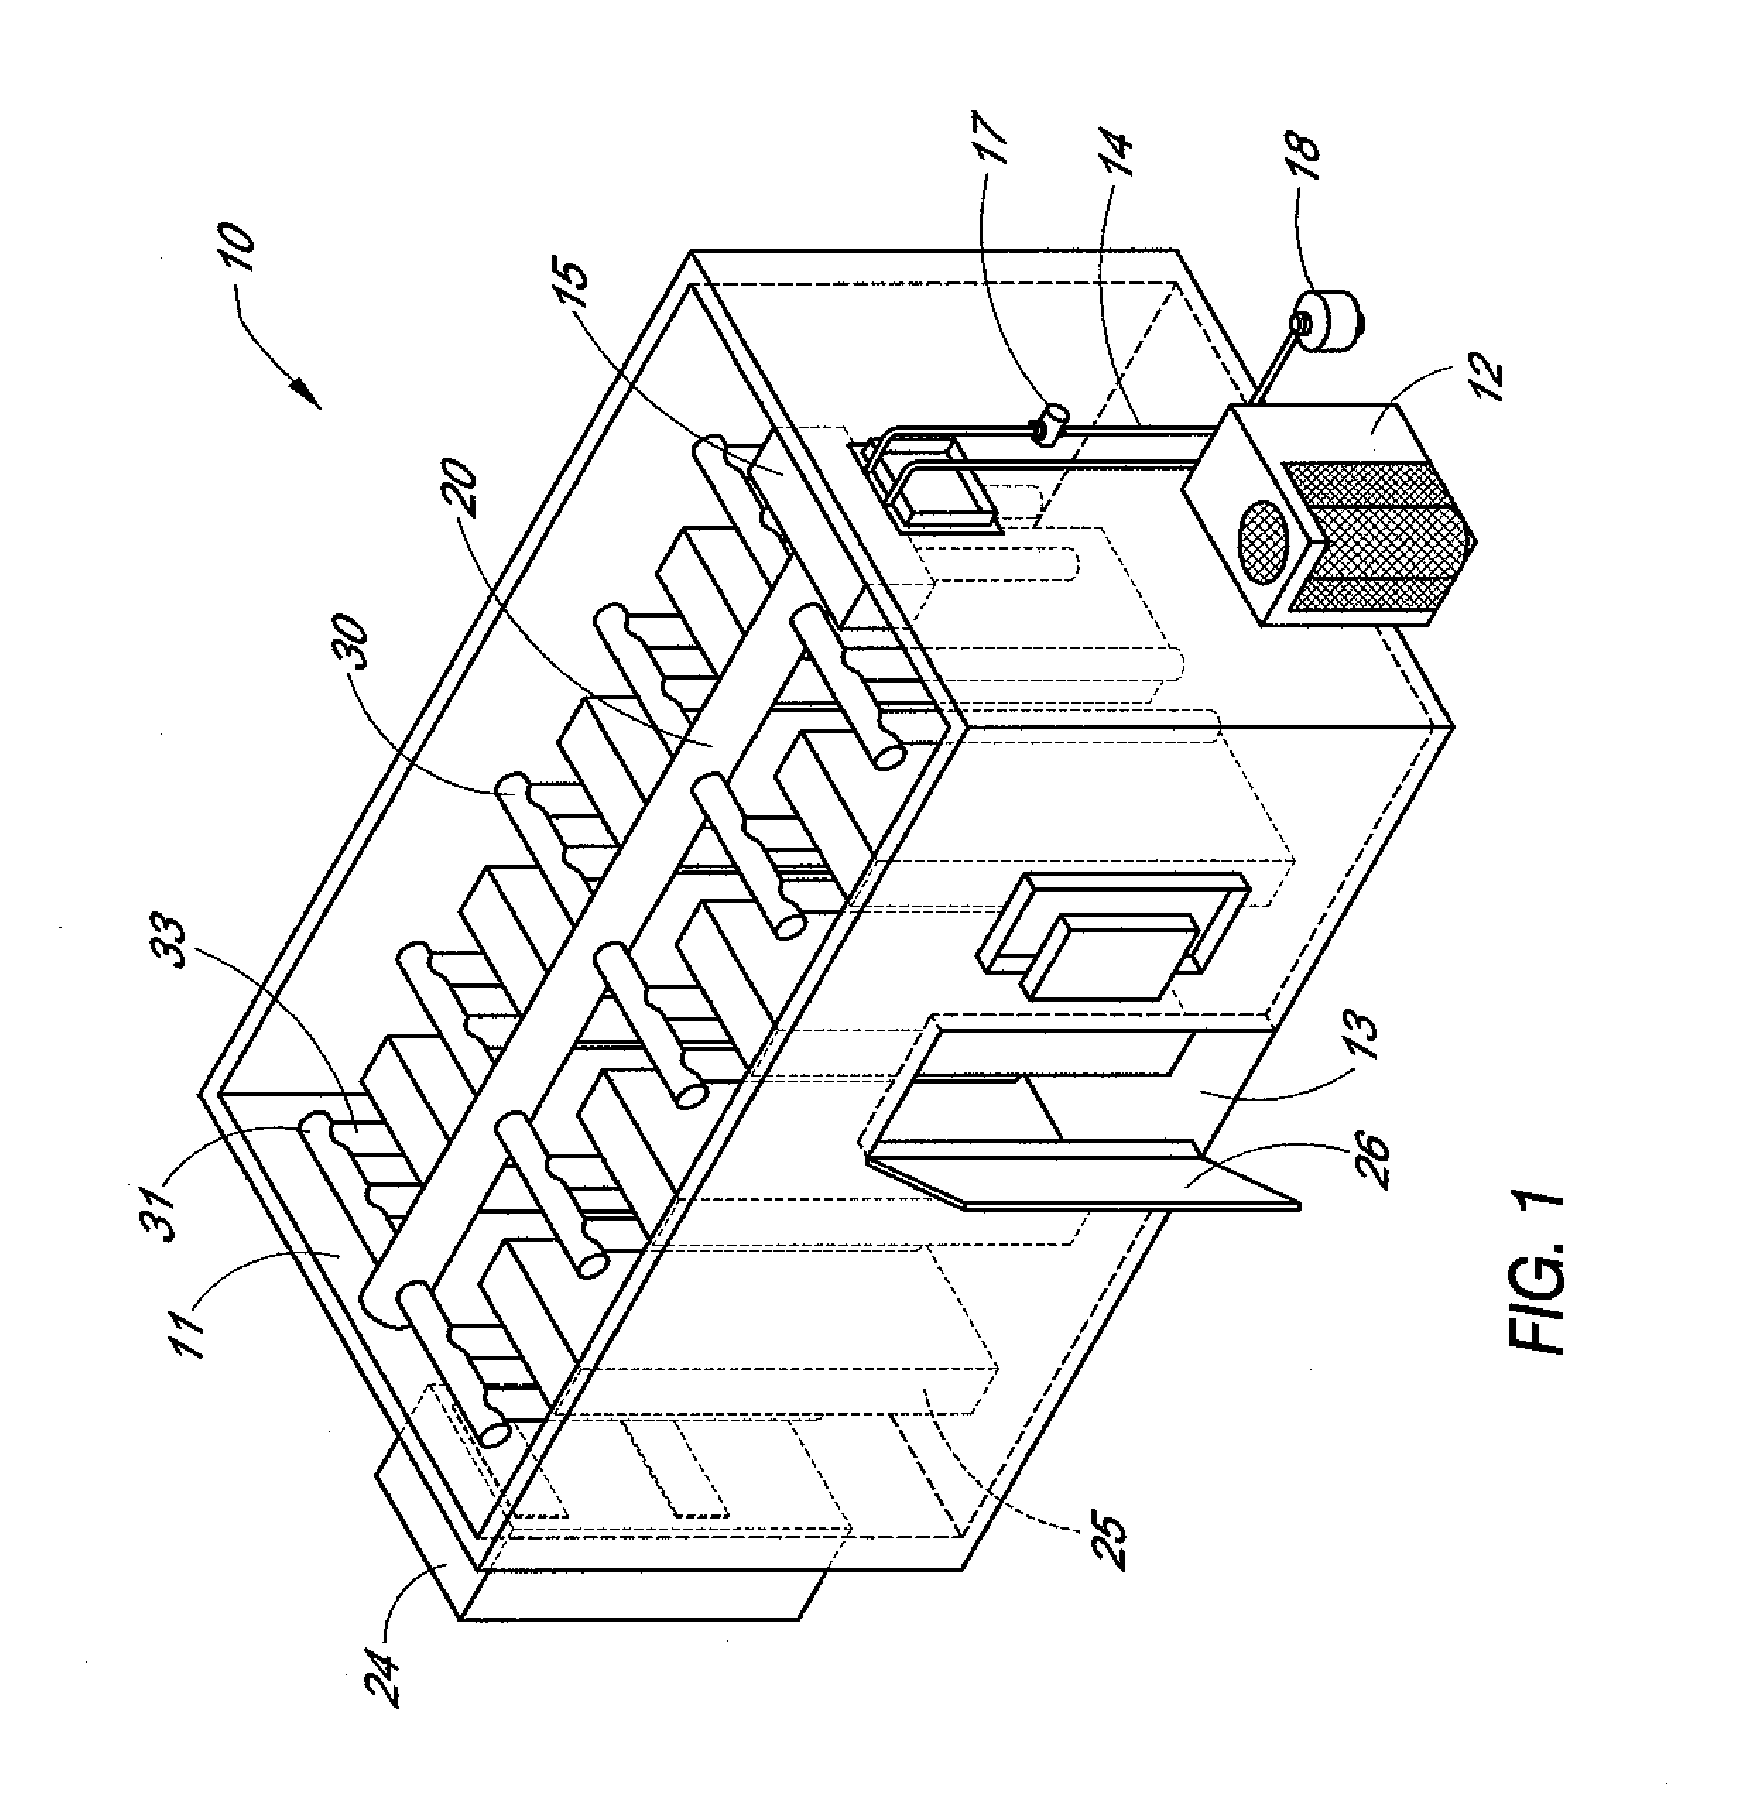 Telecommunications shelter with emergency cooling and air distribution assembly